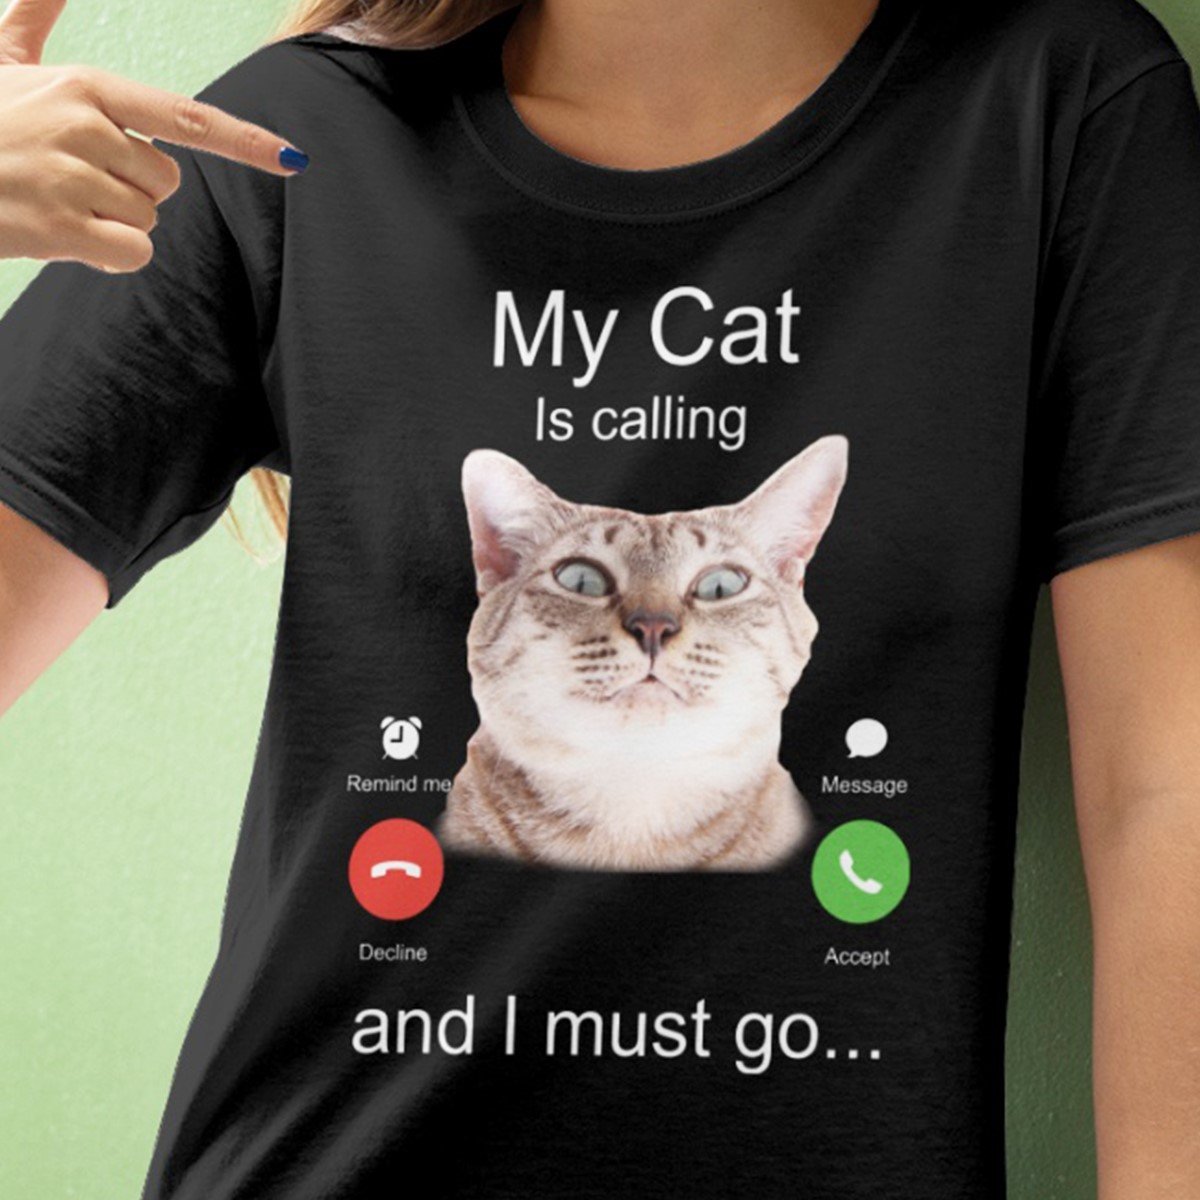 My cat is calling I must go funny shirt, cat gifts for cat lovers, cat lovers gifts, best gifts for cat lovers, presents for cat lovers, best gift for cat lovers, cat lovers gifts, cat shirt ? GST